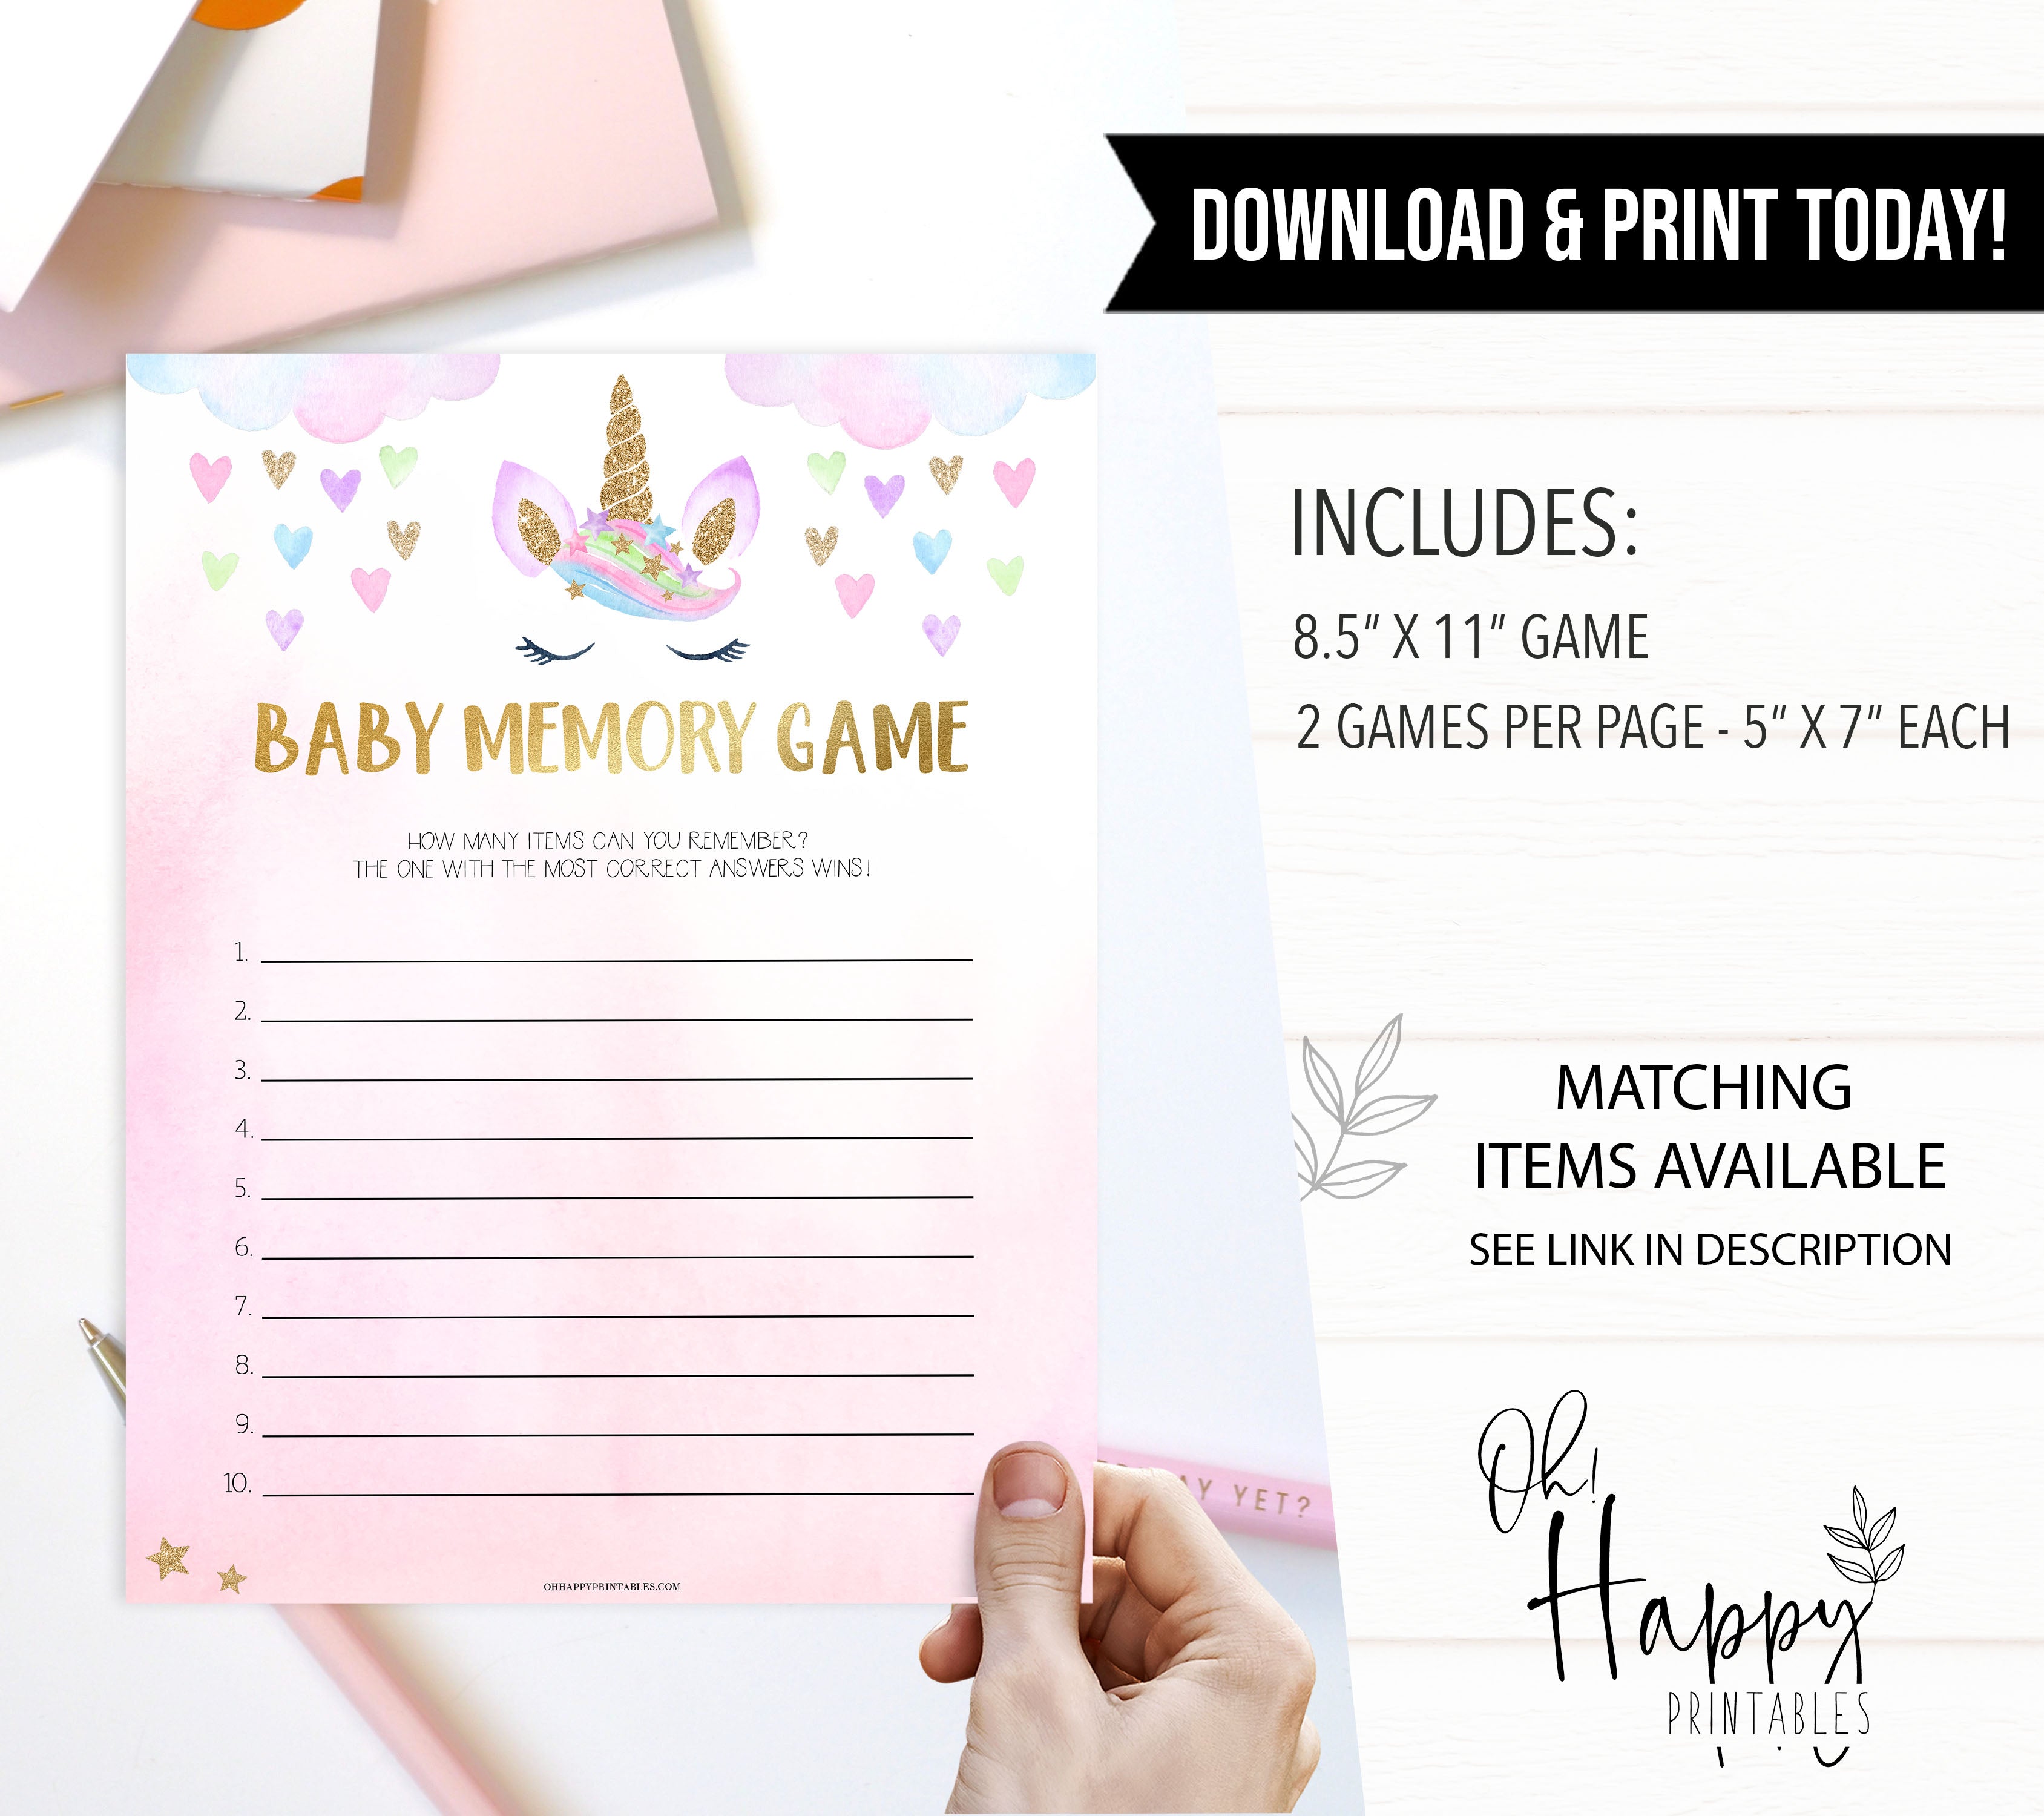 baby memory game, Printable baby shower games, unicorn baby games, baby shower games, fun baby shower ideas, top baby shower ideas, unicorn baby shower, baby shower games, fun unicorn baby shower ideas